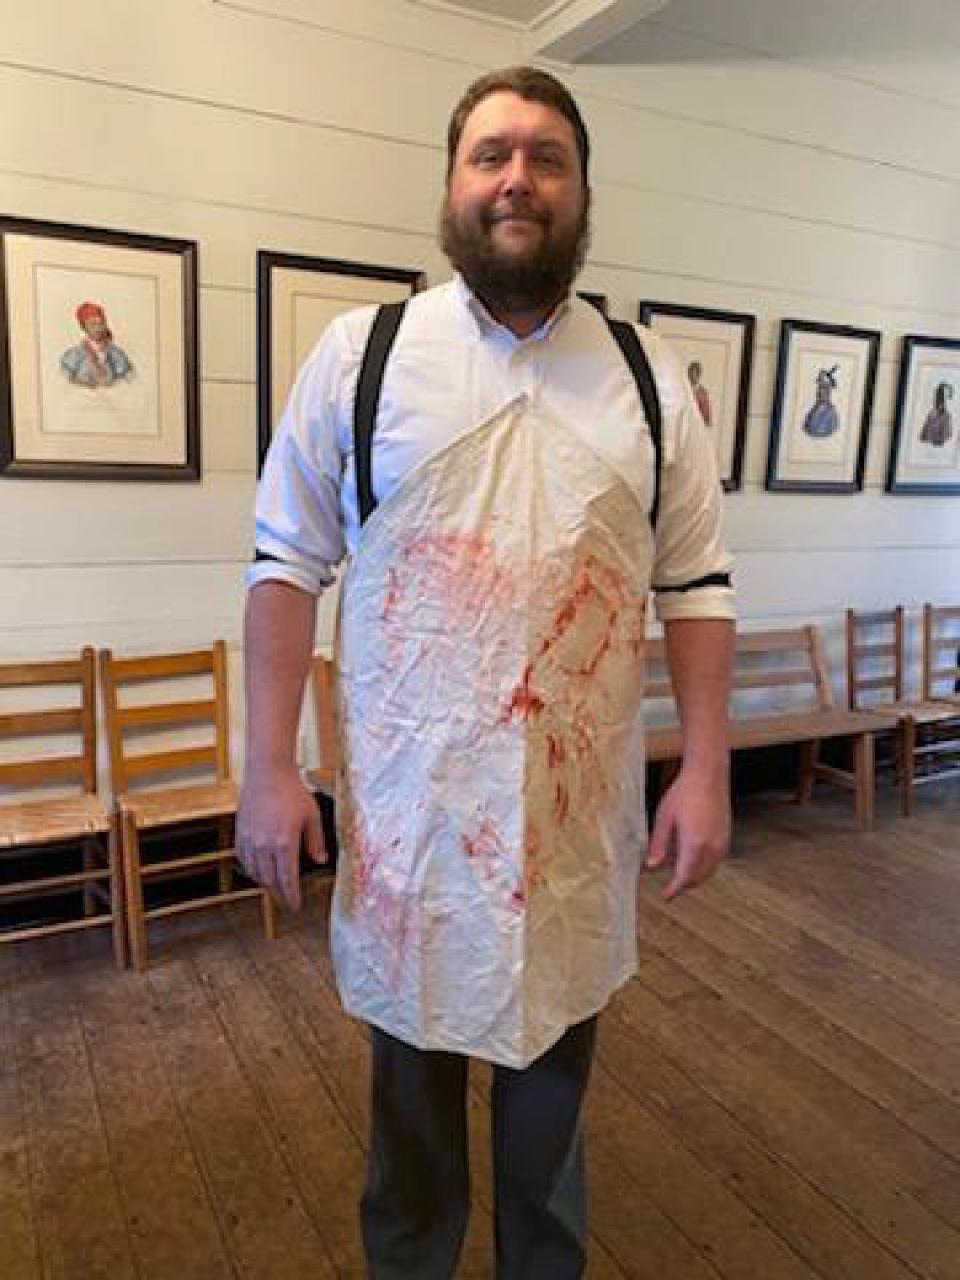 A trip to visit Dr. Duncan could cost you an arm and a leg. He had to do many amputations in his day. He's played by Wesley Garmon for the Haunting at Old Alabama Town.